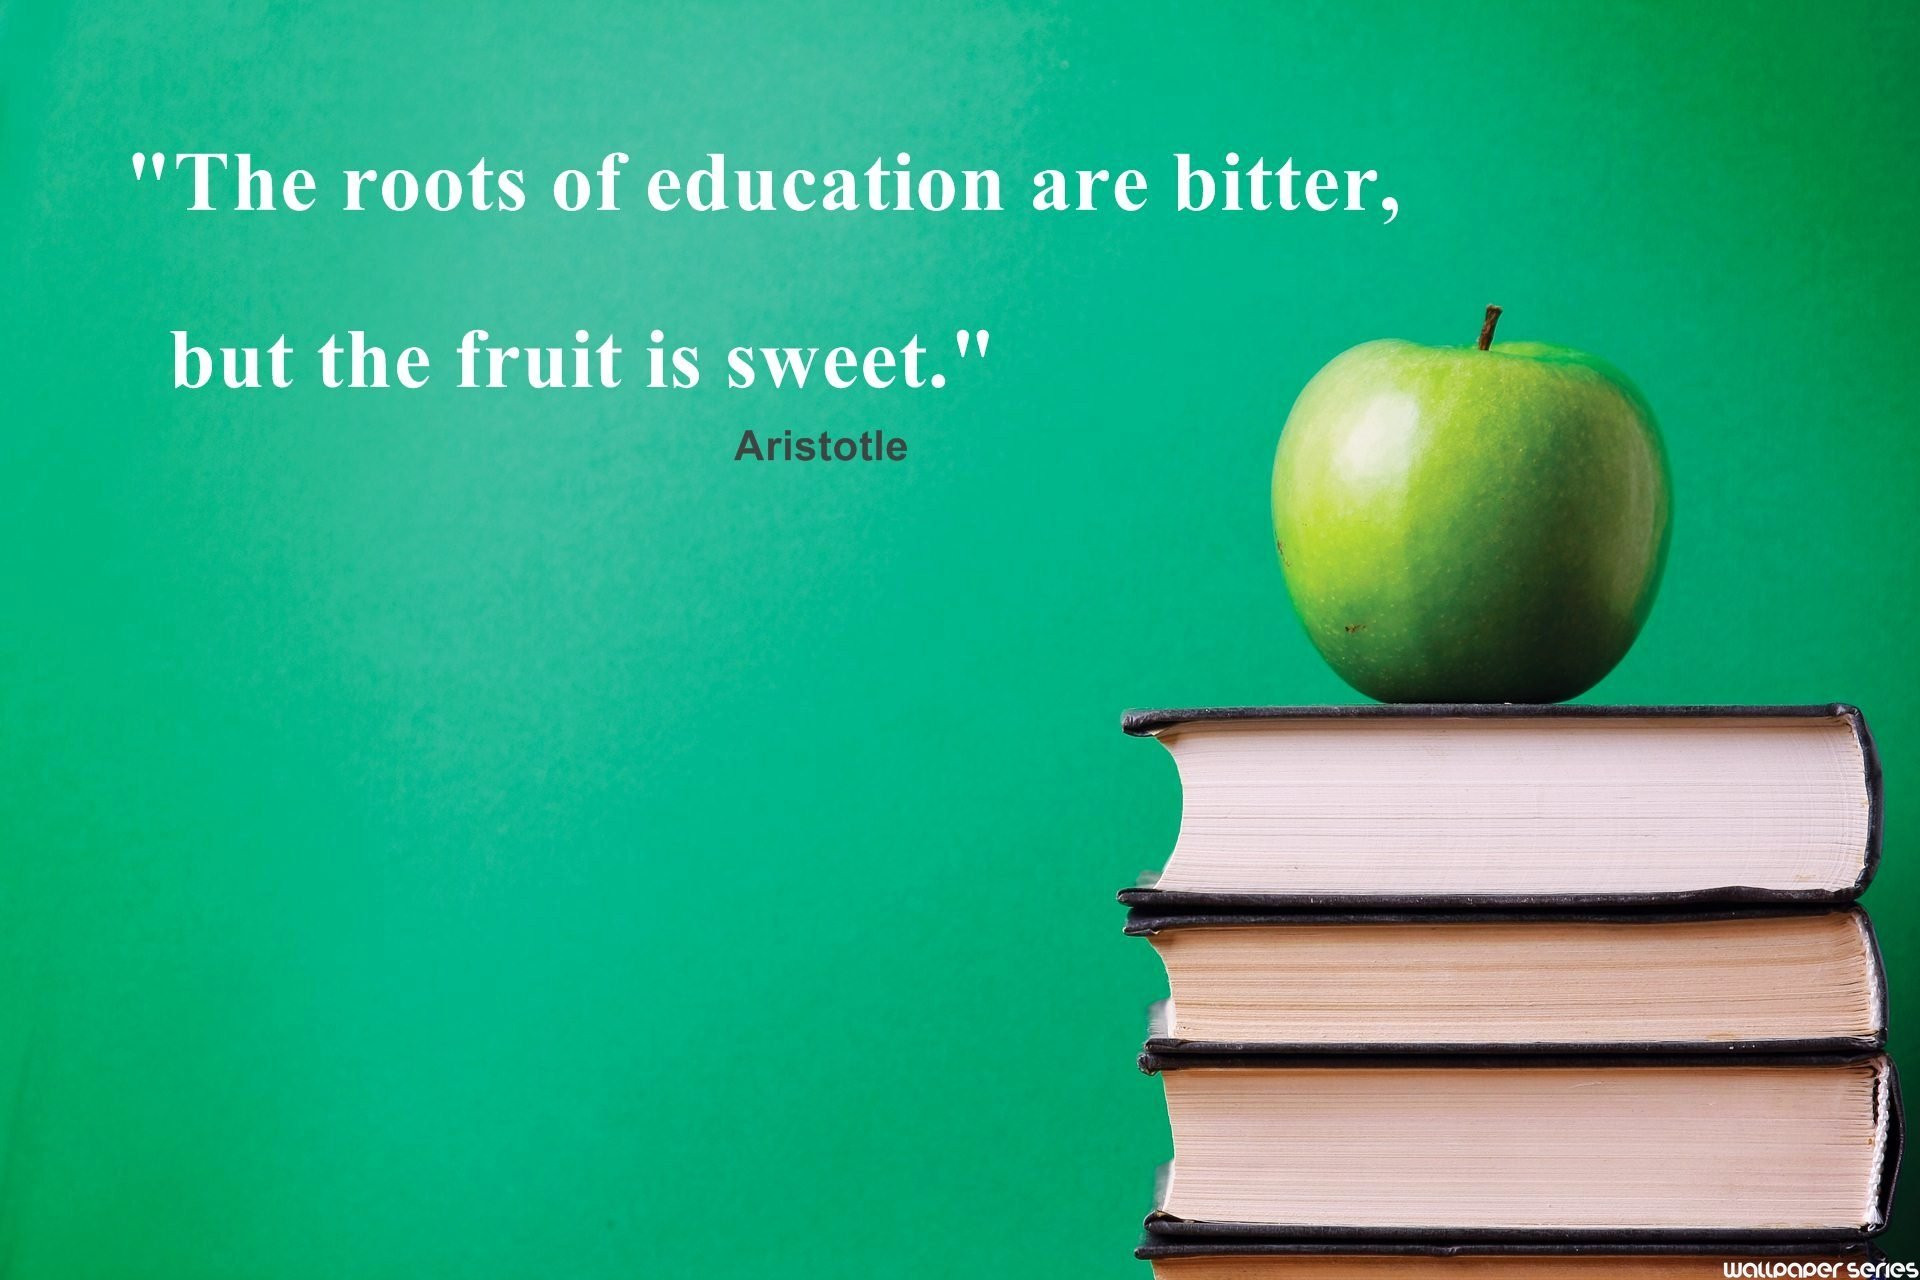 Aristotle Education Quotes
 Day 4 What do you love most about teaching